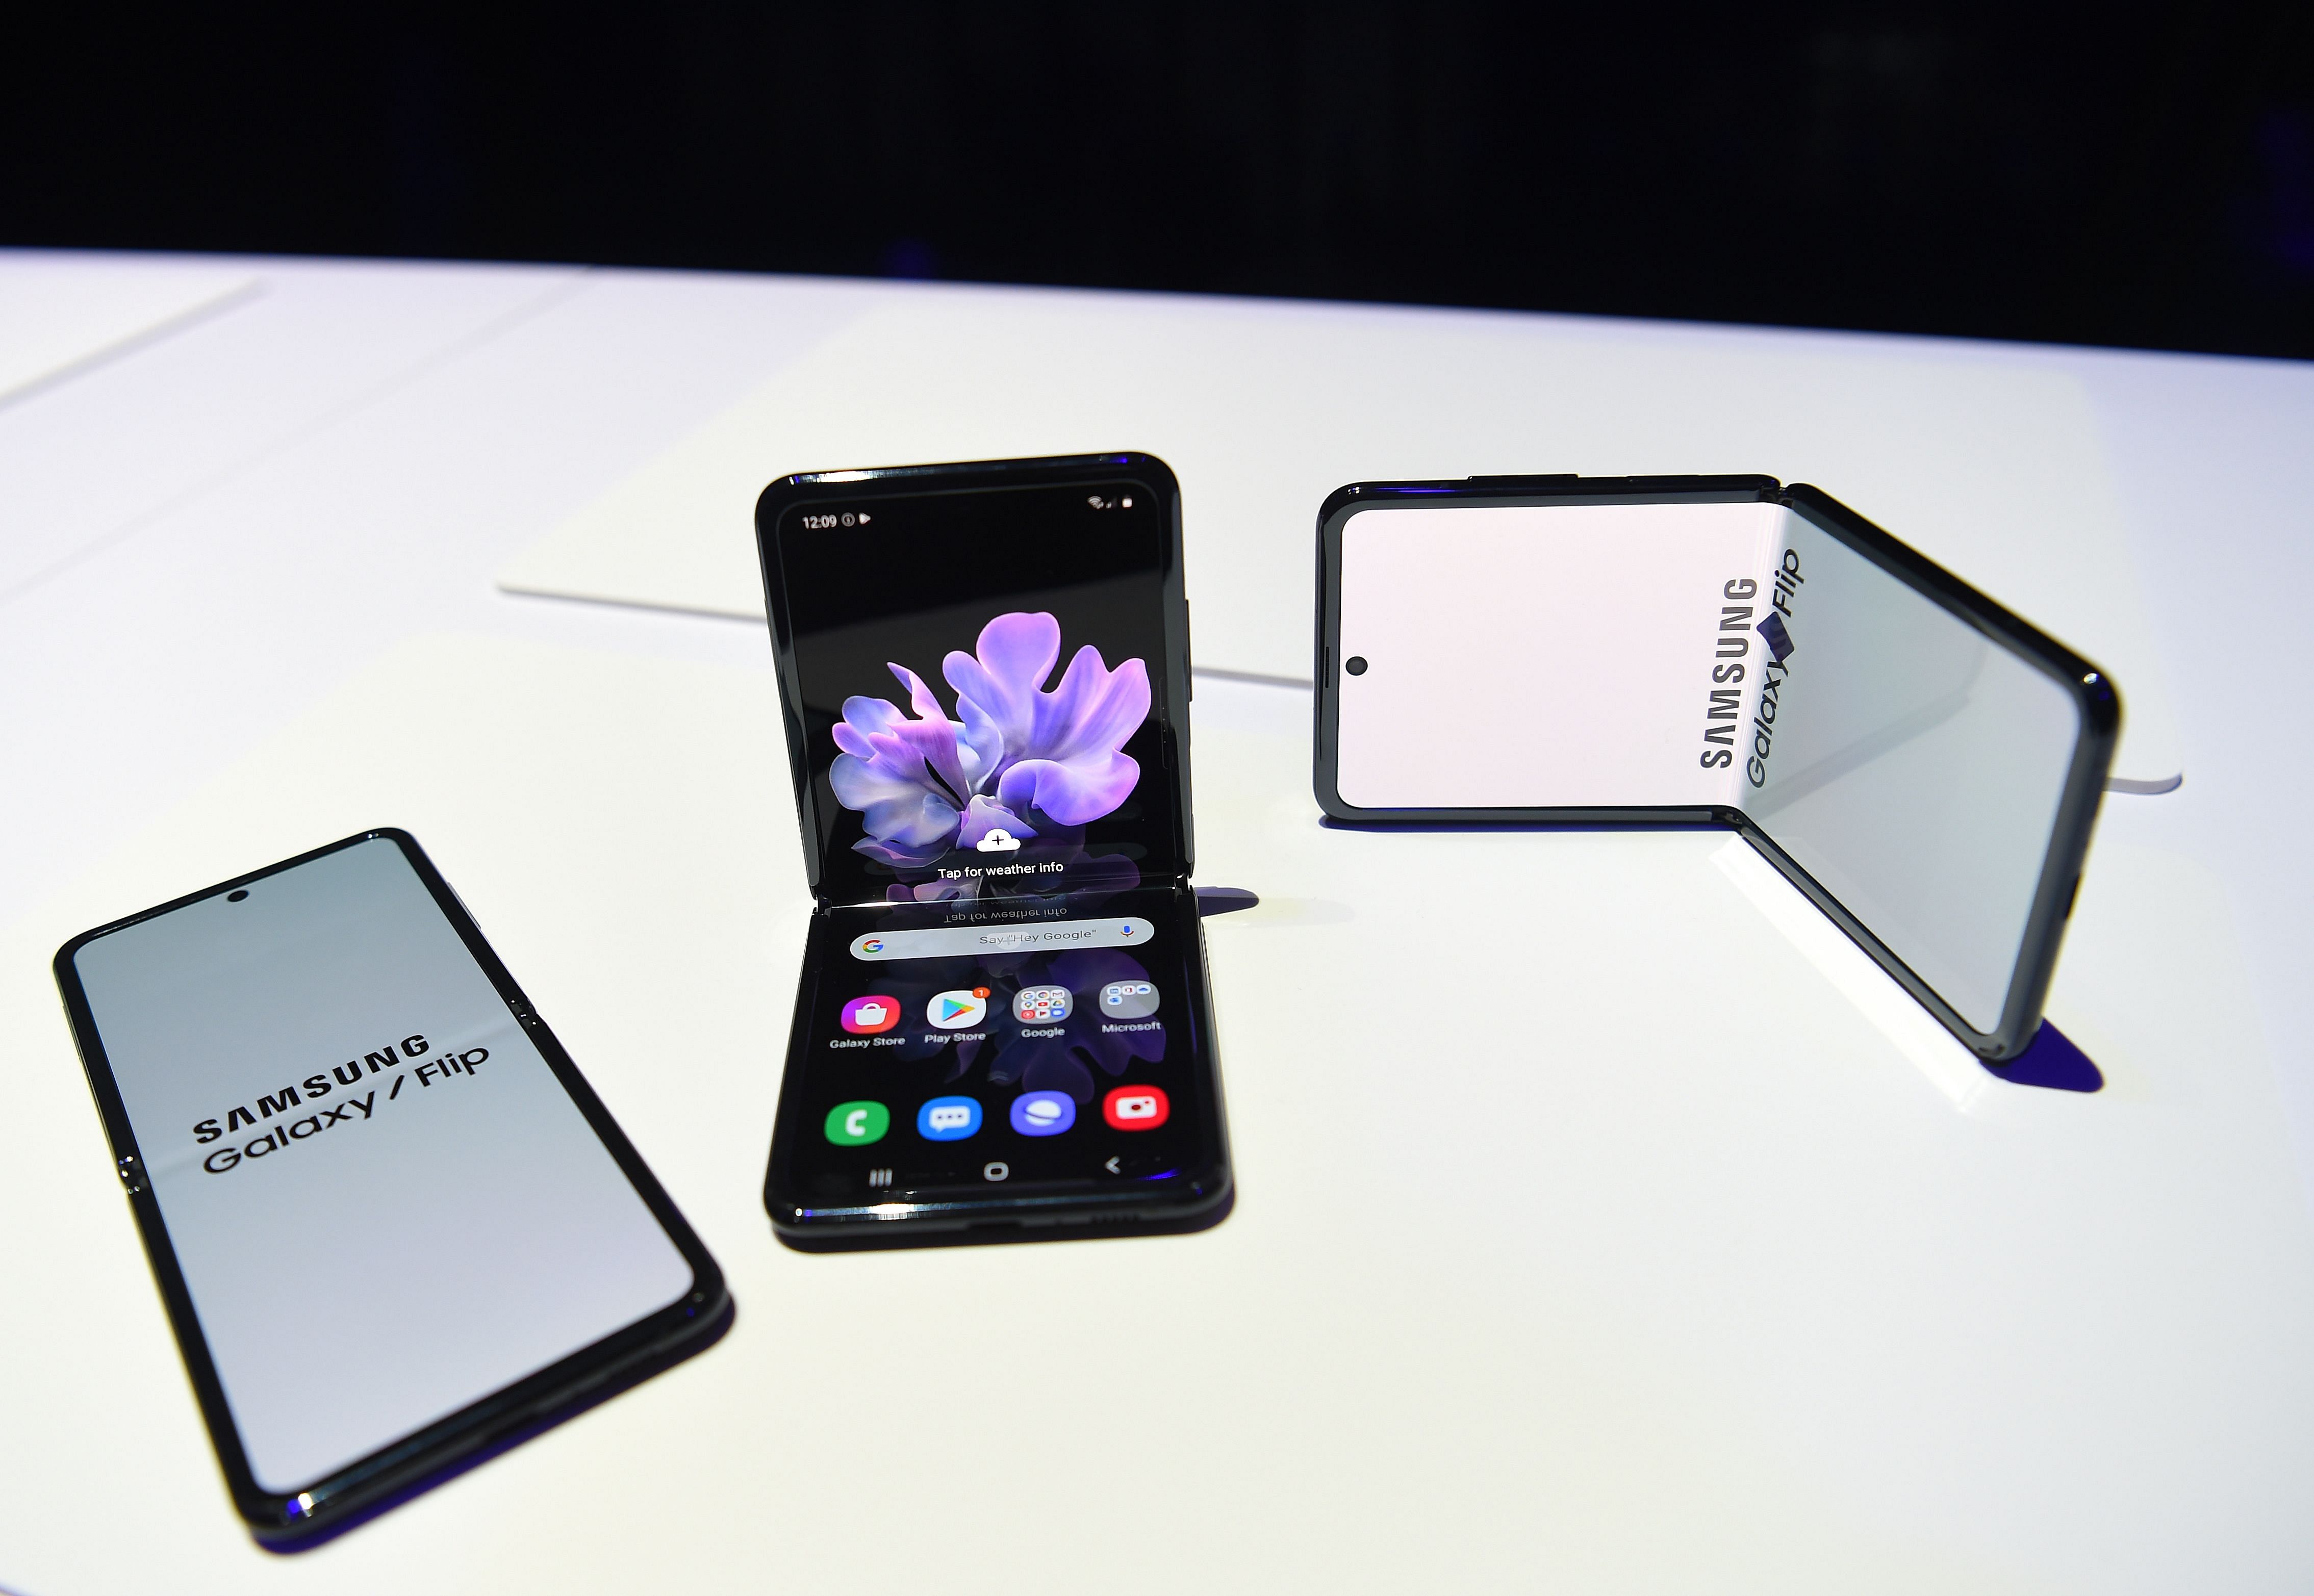 Samsung Galaxy Z Flip phones are seen on display during the Samsung Galaxy Unpacked 2020 event in San Francisco, California. (Reuters Photo)